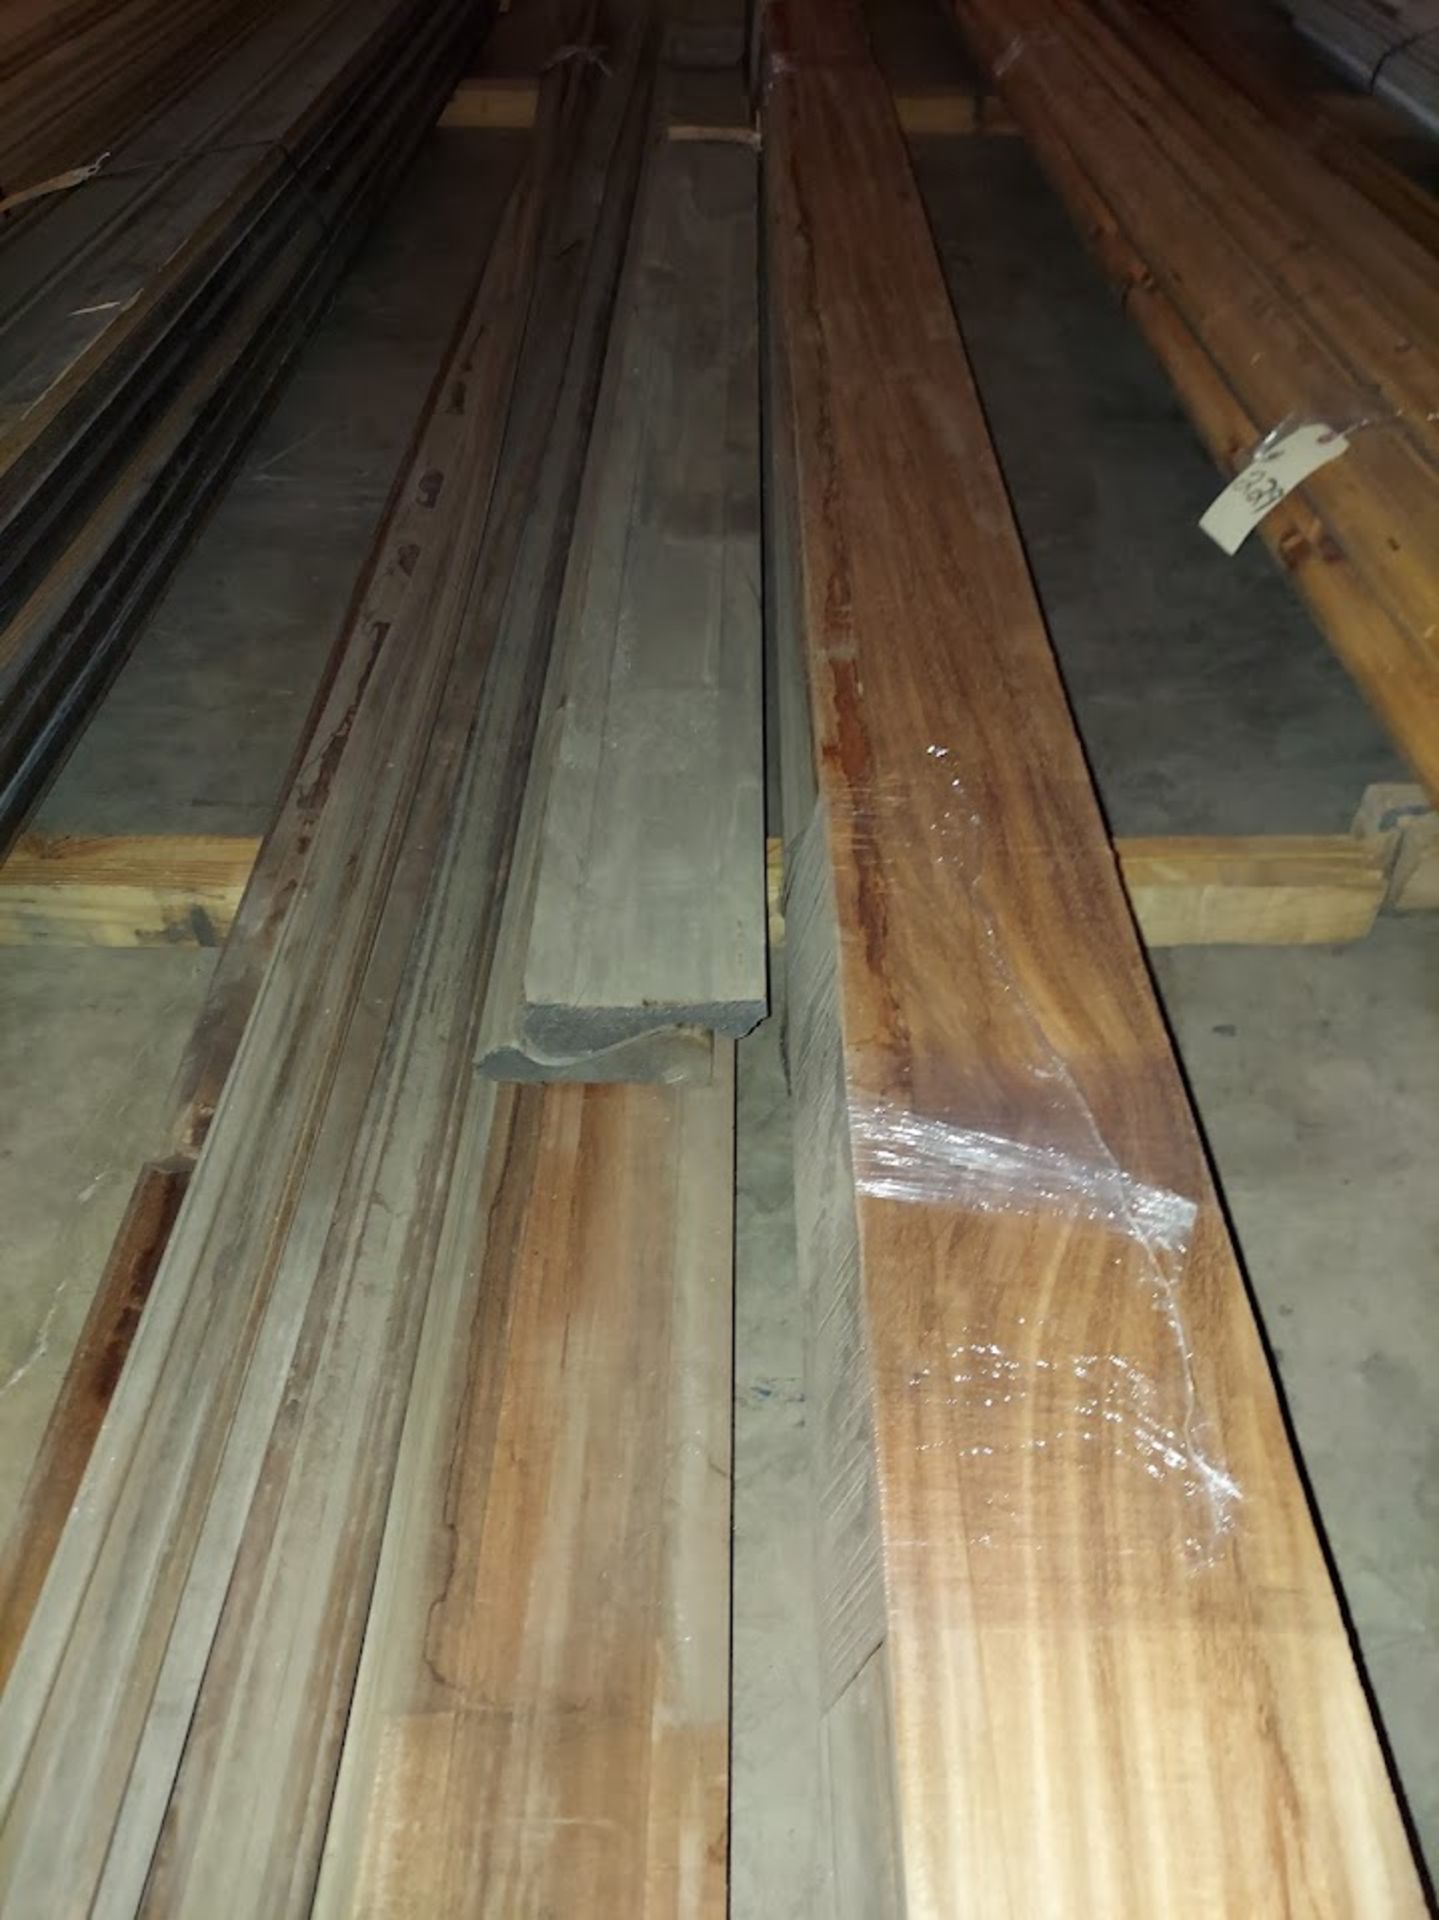 Lot of African Mahogany Molding, Up to 17' Long - Image 3 of 3